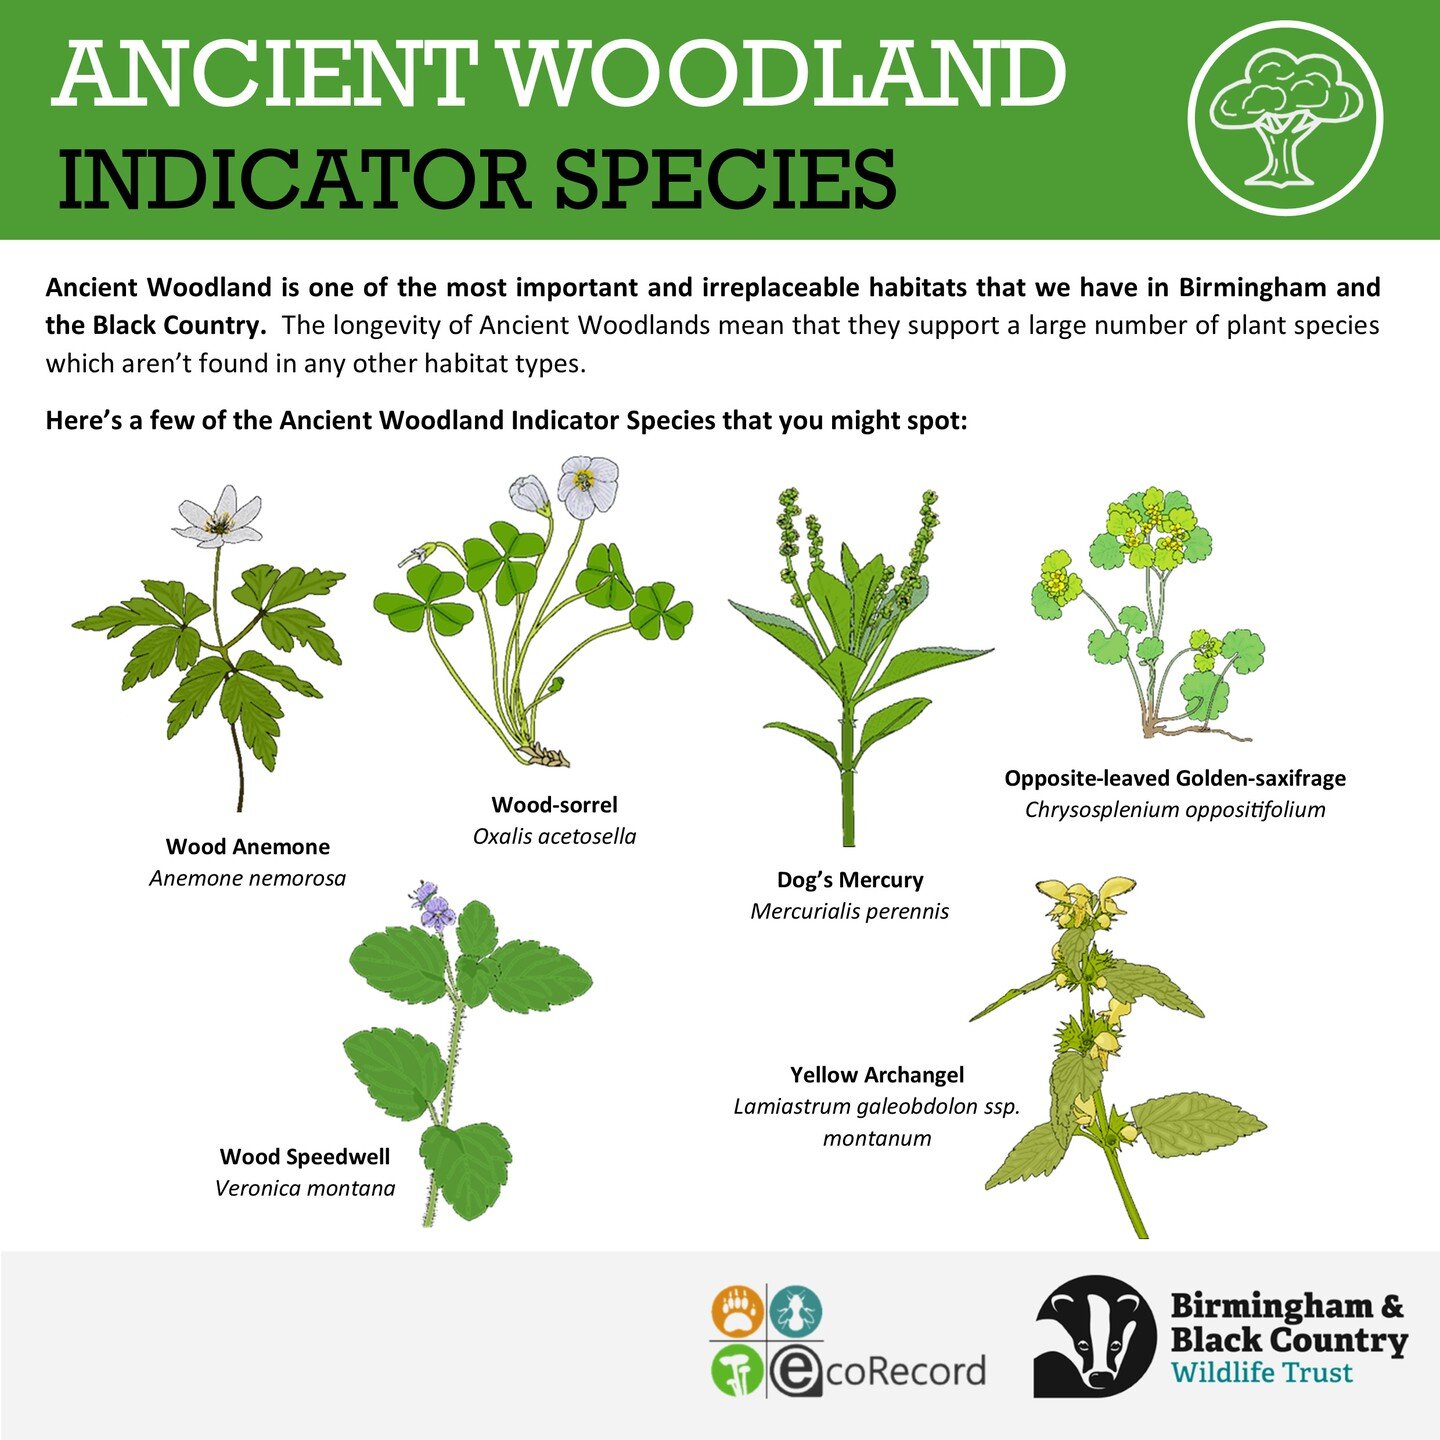 Have you been exploring any woodlands lately? Ancient woodlands are irreplaceable habitats which are defined as existing before the 1600s. These are some plant species which may indicate ancient woodlands, and now is the time of year where many of th